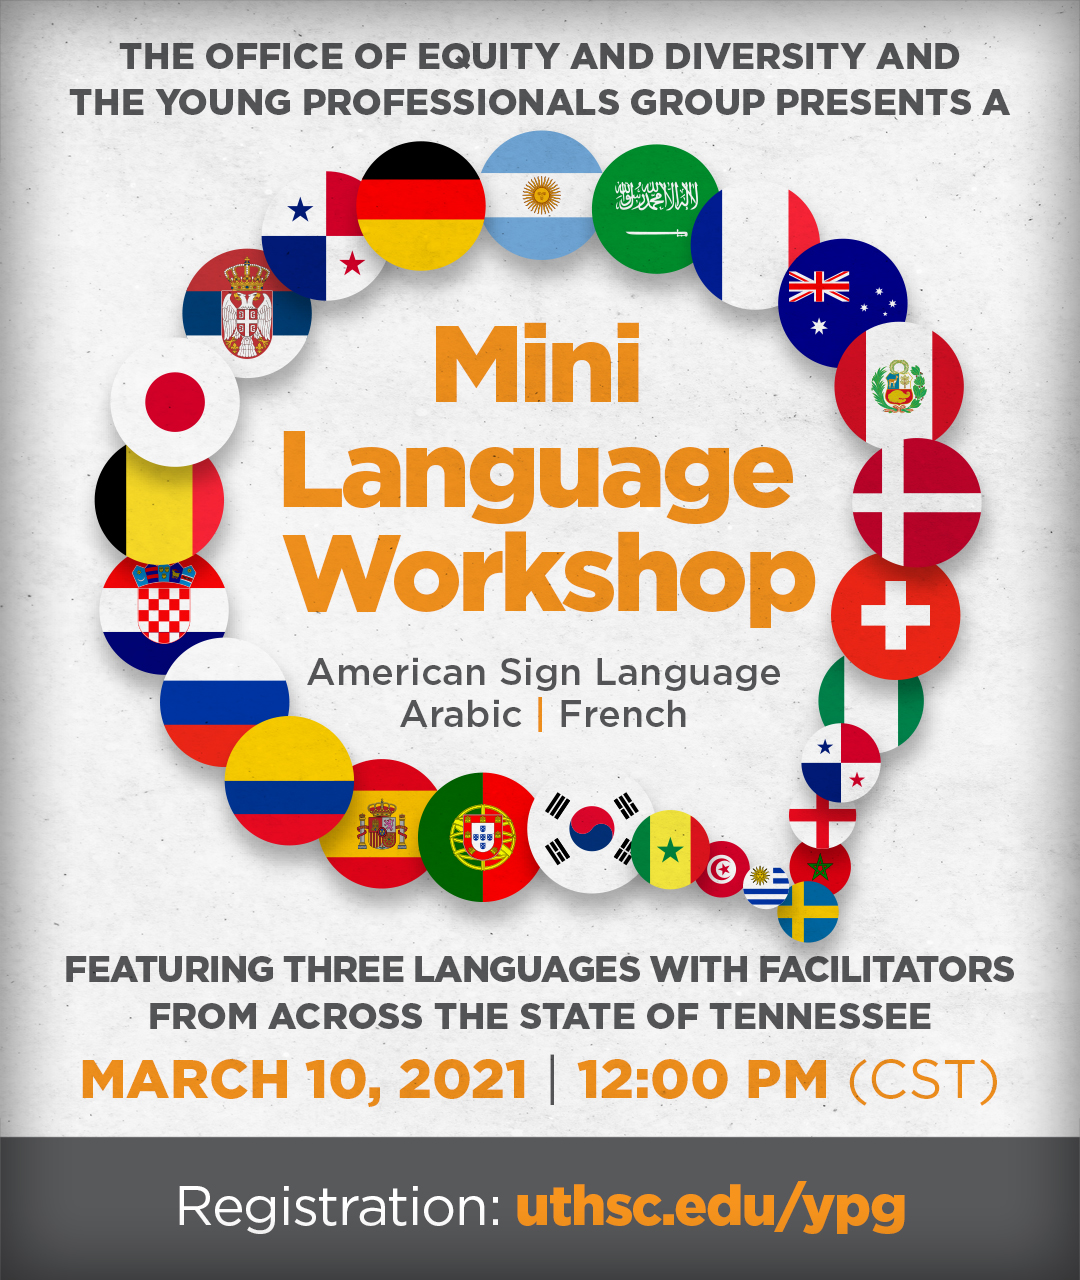 The Office of Equity and Diversity presents a mini language workshop. Information below.